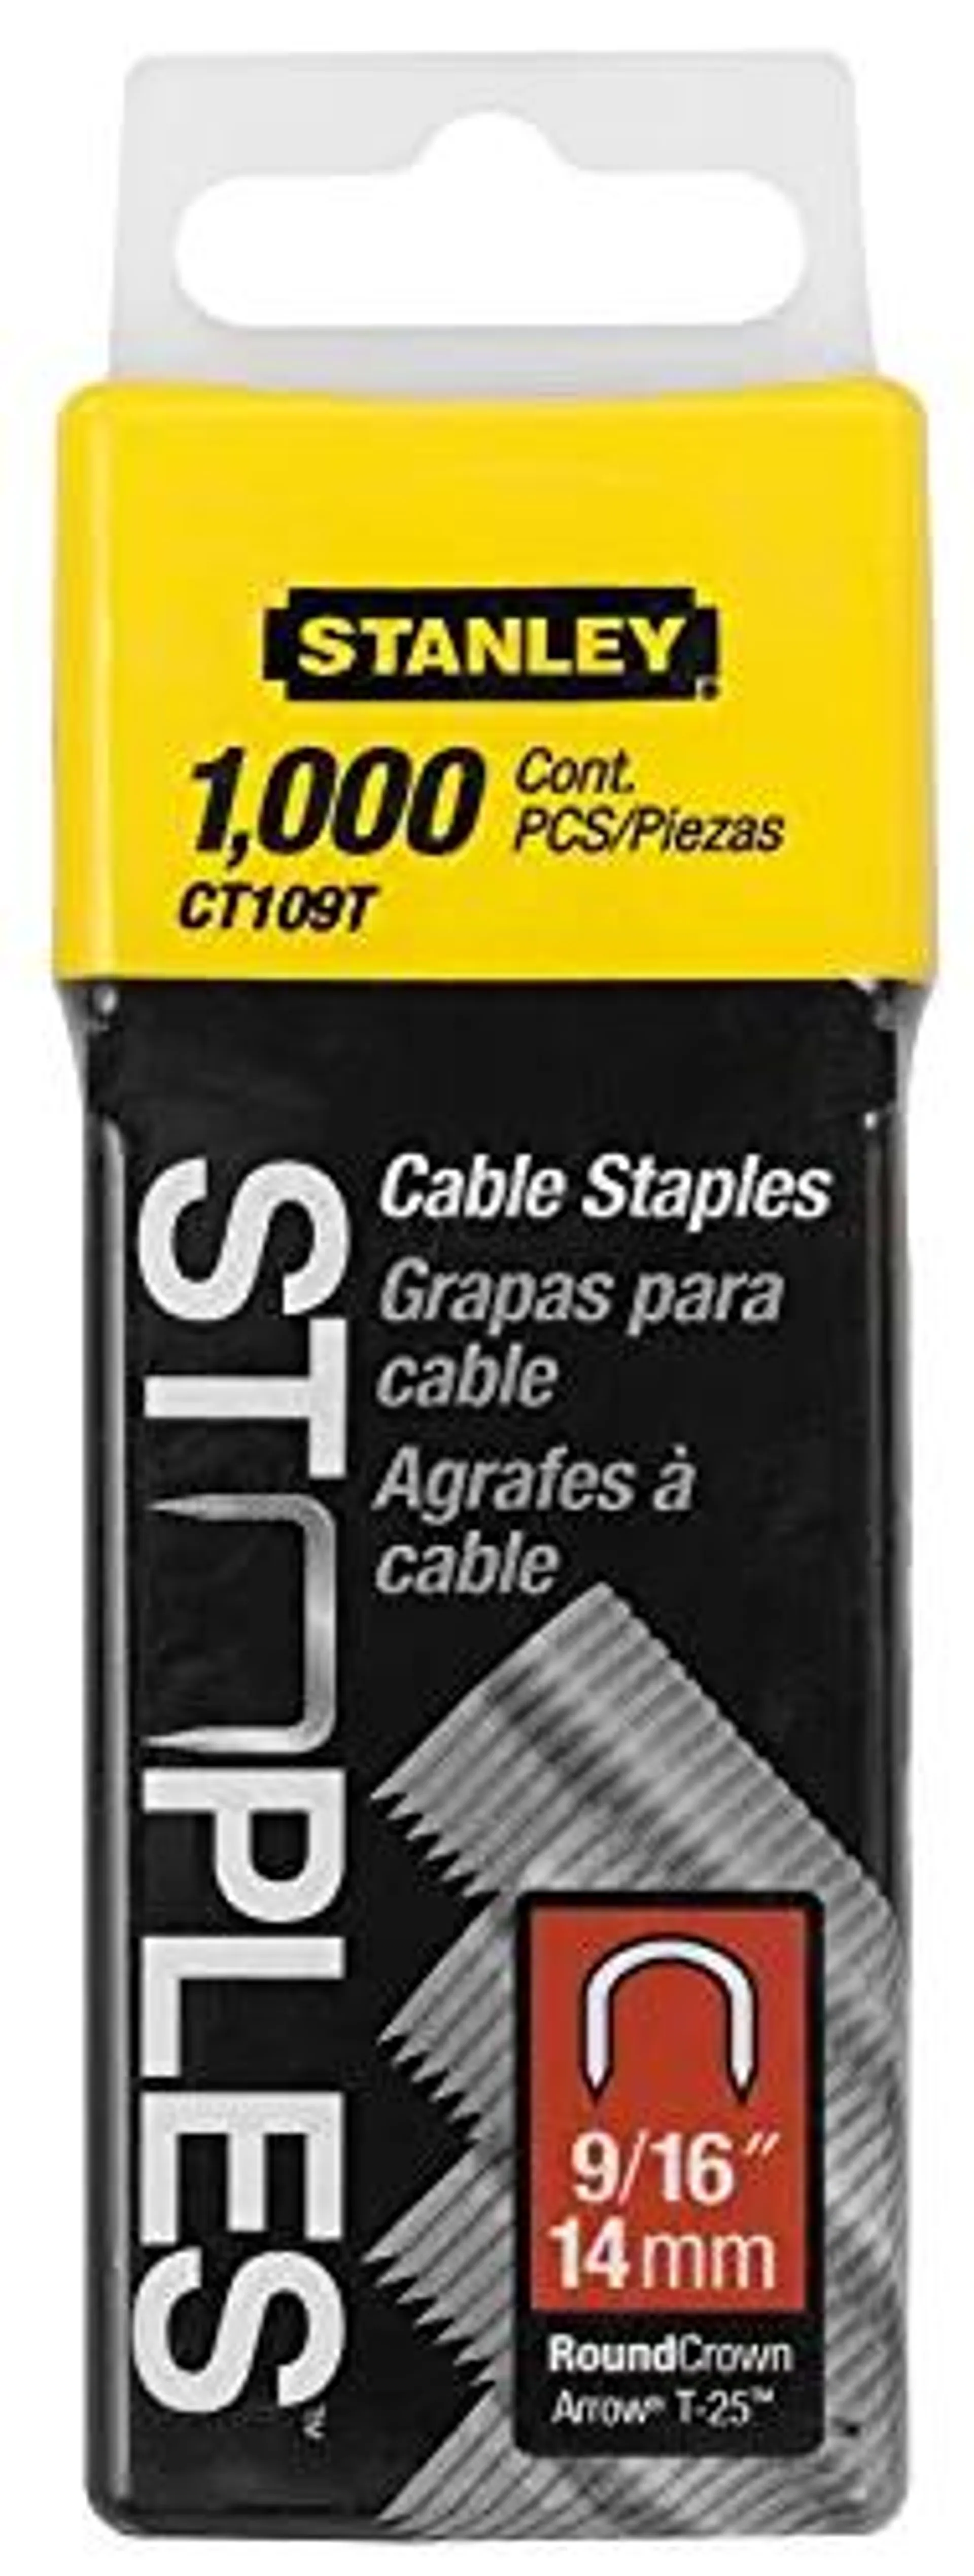 (One Piece ) Cable Staple- Staples Cable 9/16 From Stanley Hand Tools (Part Number CT109T)